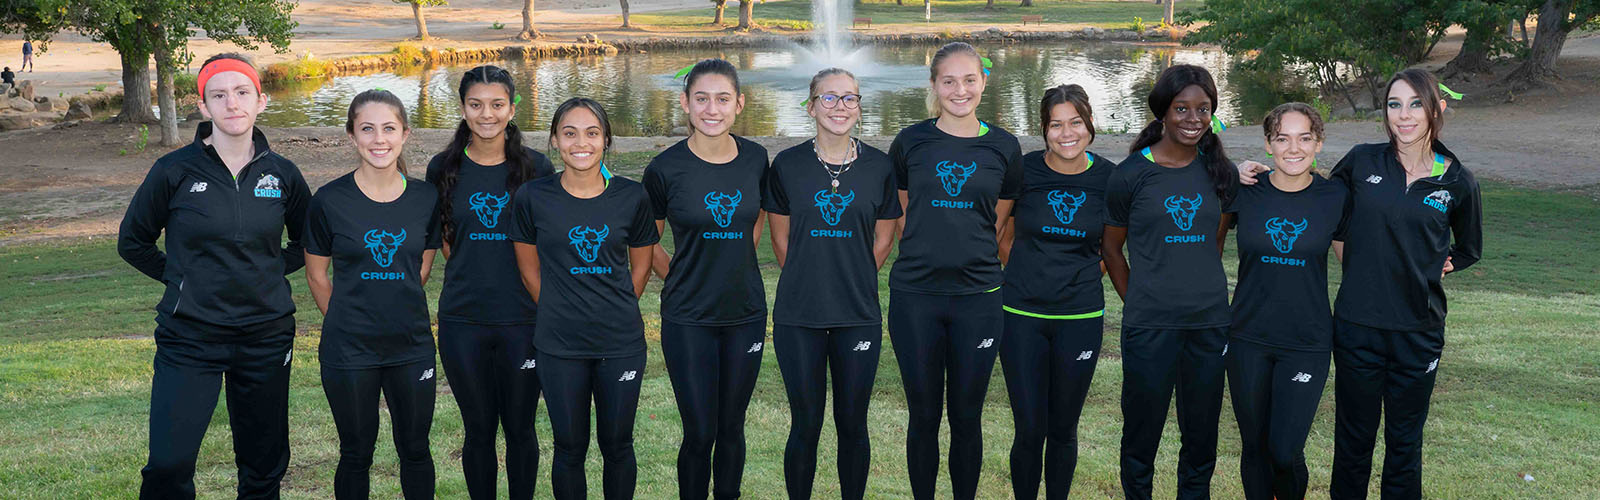 A team shot of the Clovis Community College Cross Country Women's 